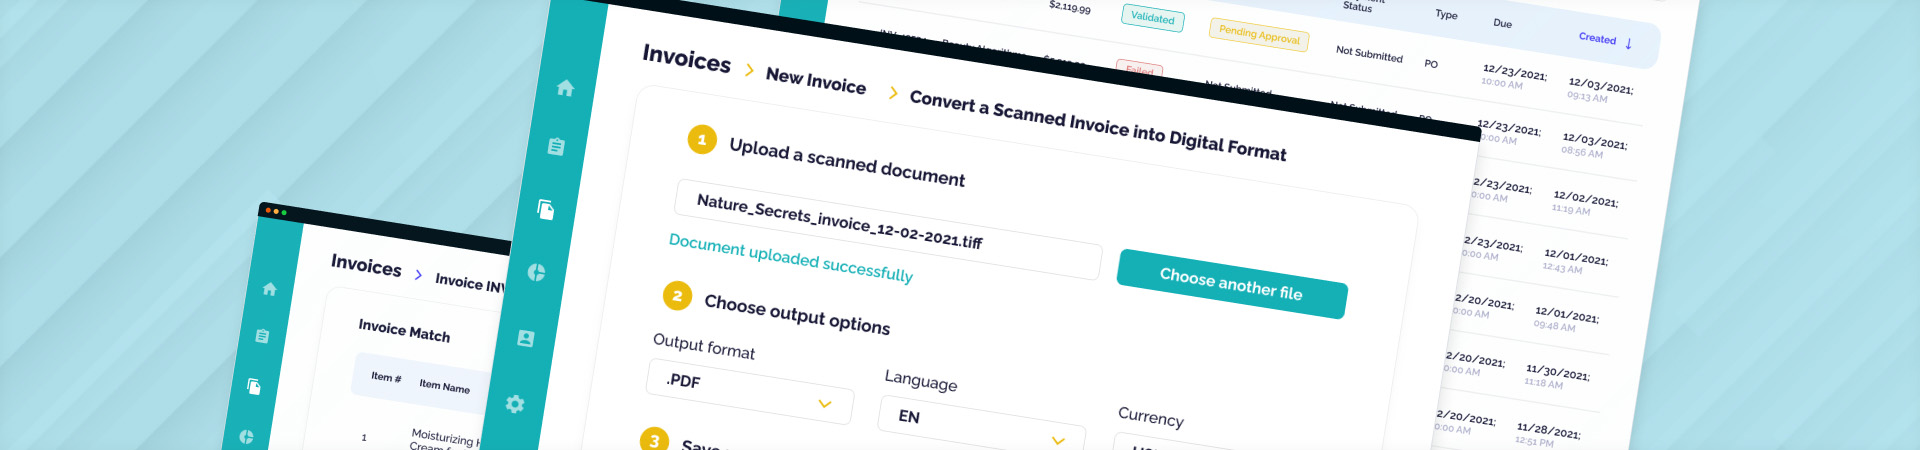 AI-Based Software Product for Fully Automated Invoice Processing